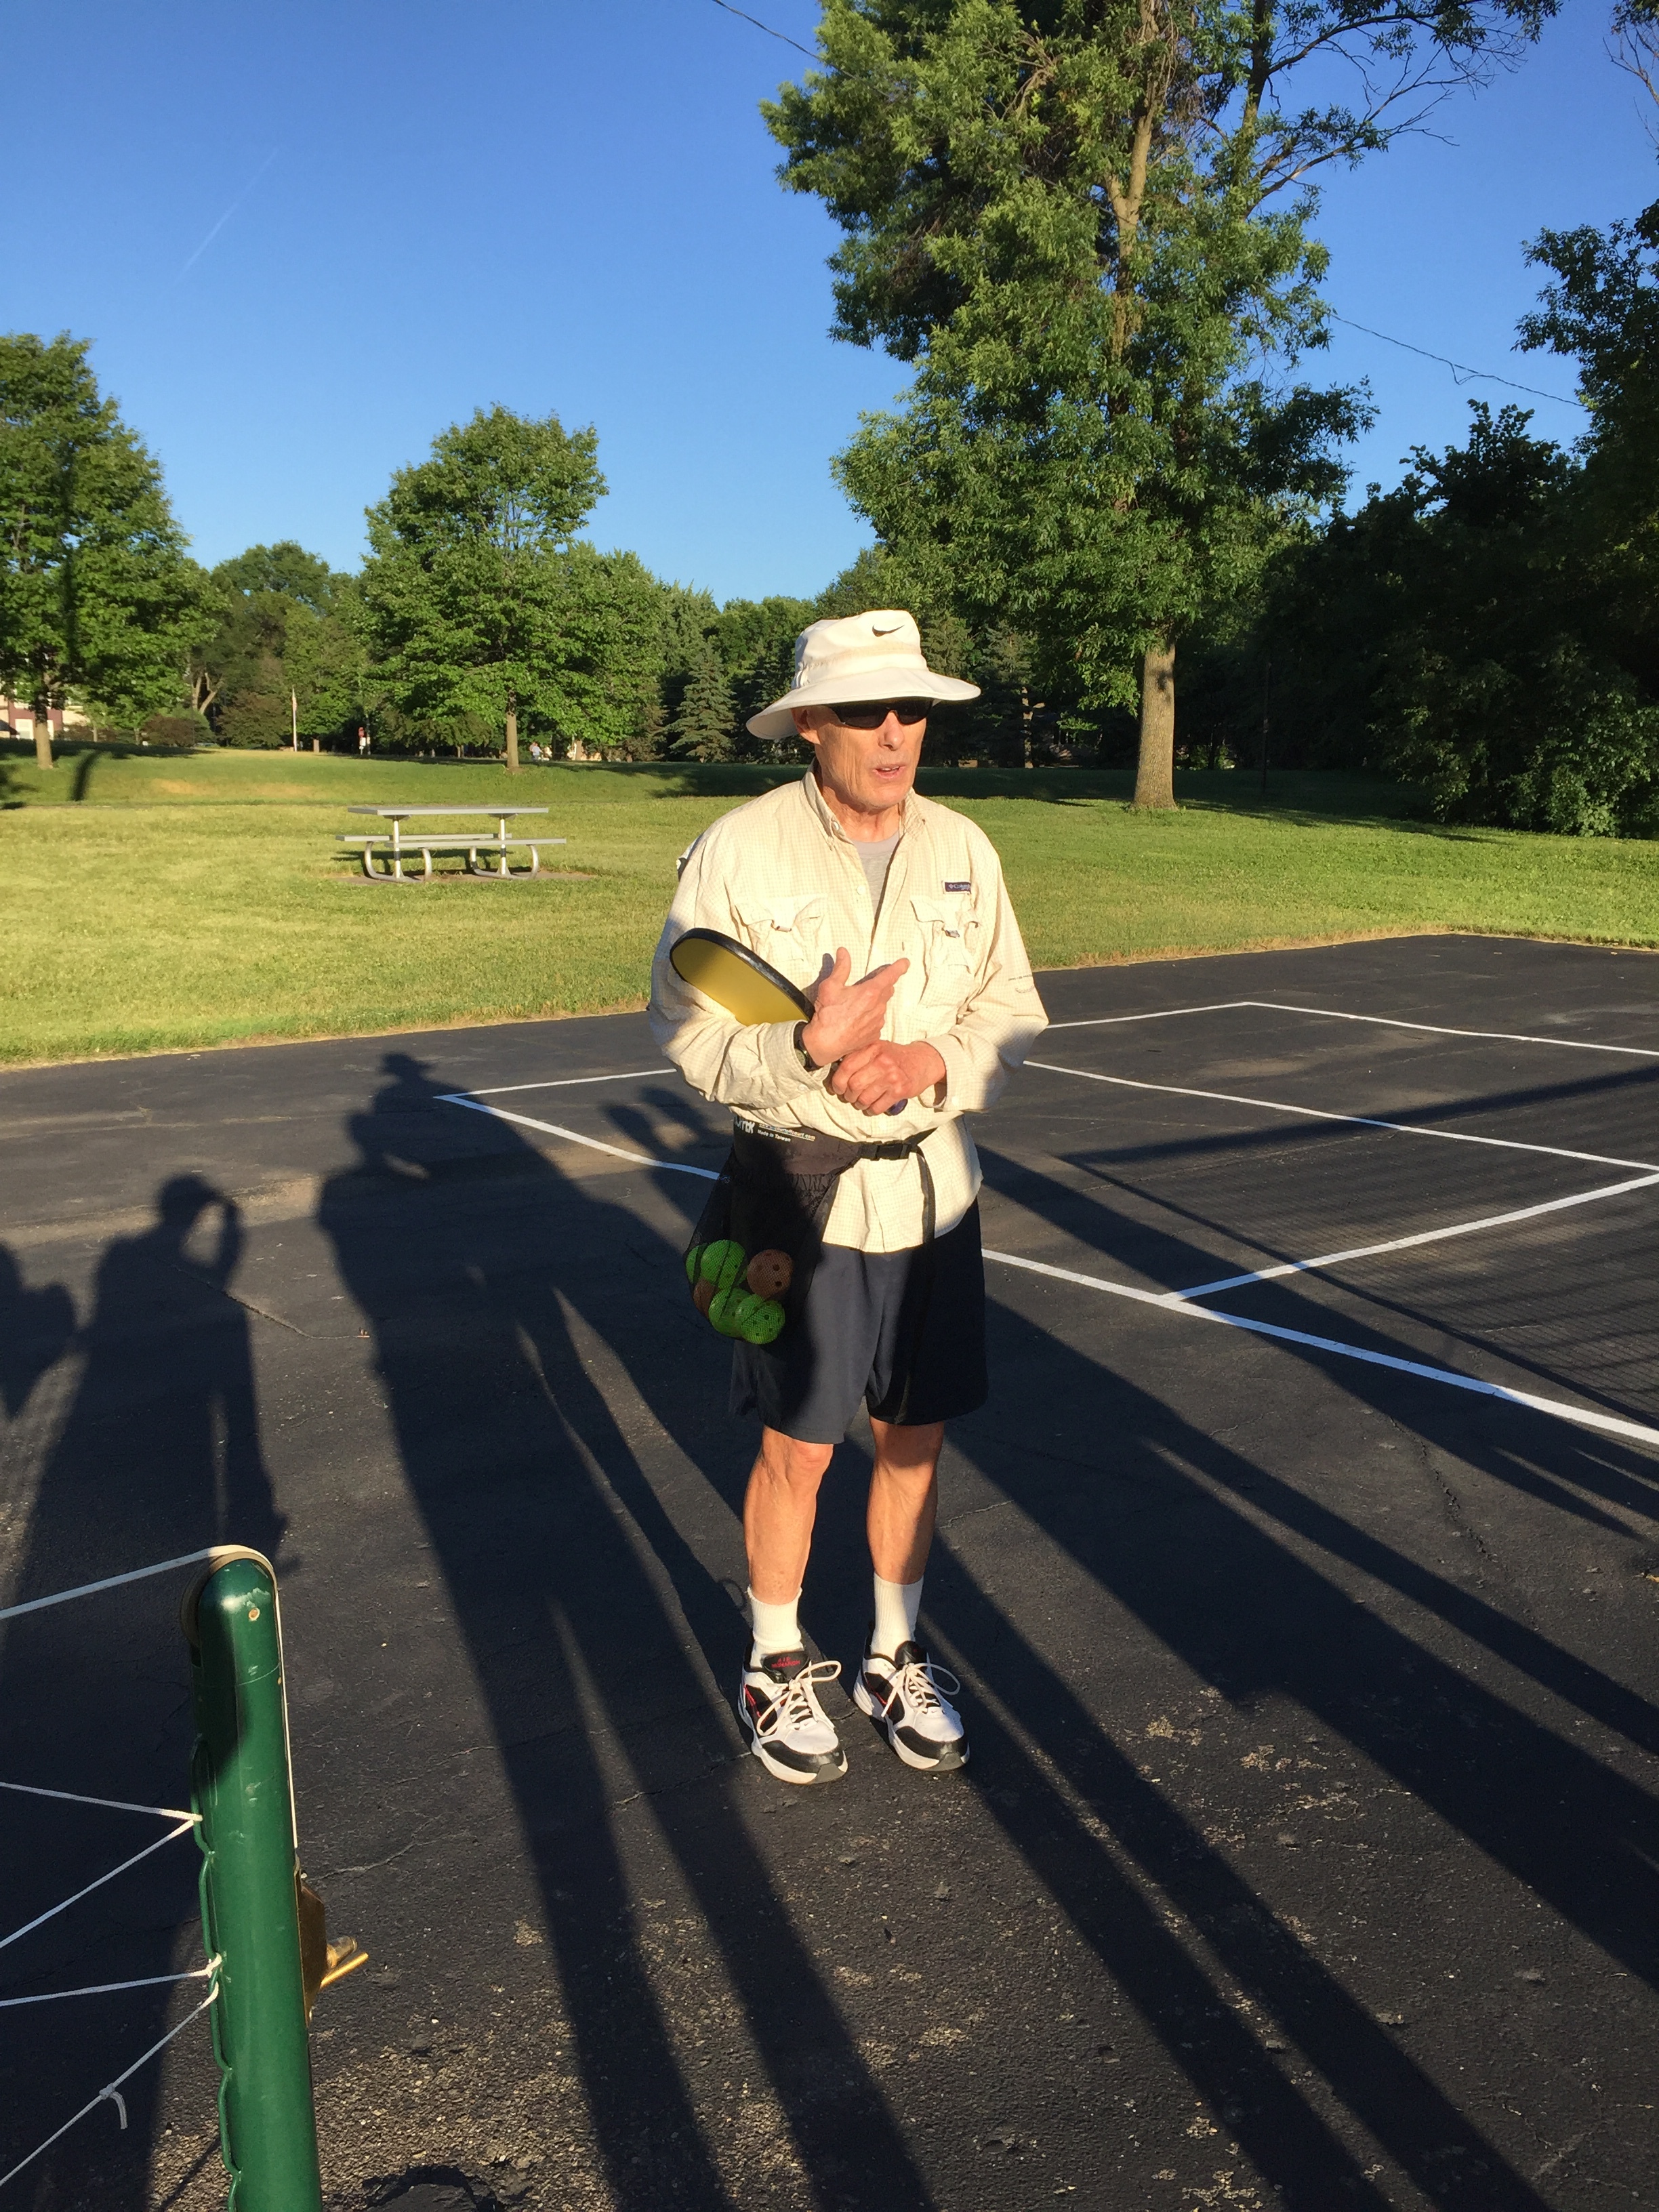 My Dad Howard (my other tennis teacher). His new passion is pickleball.